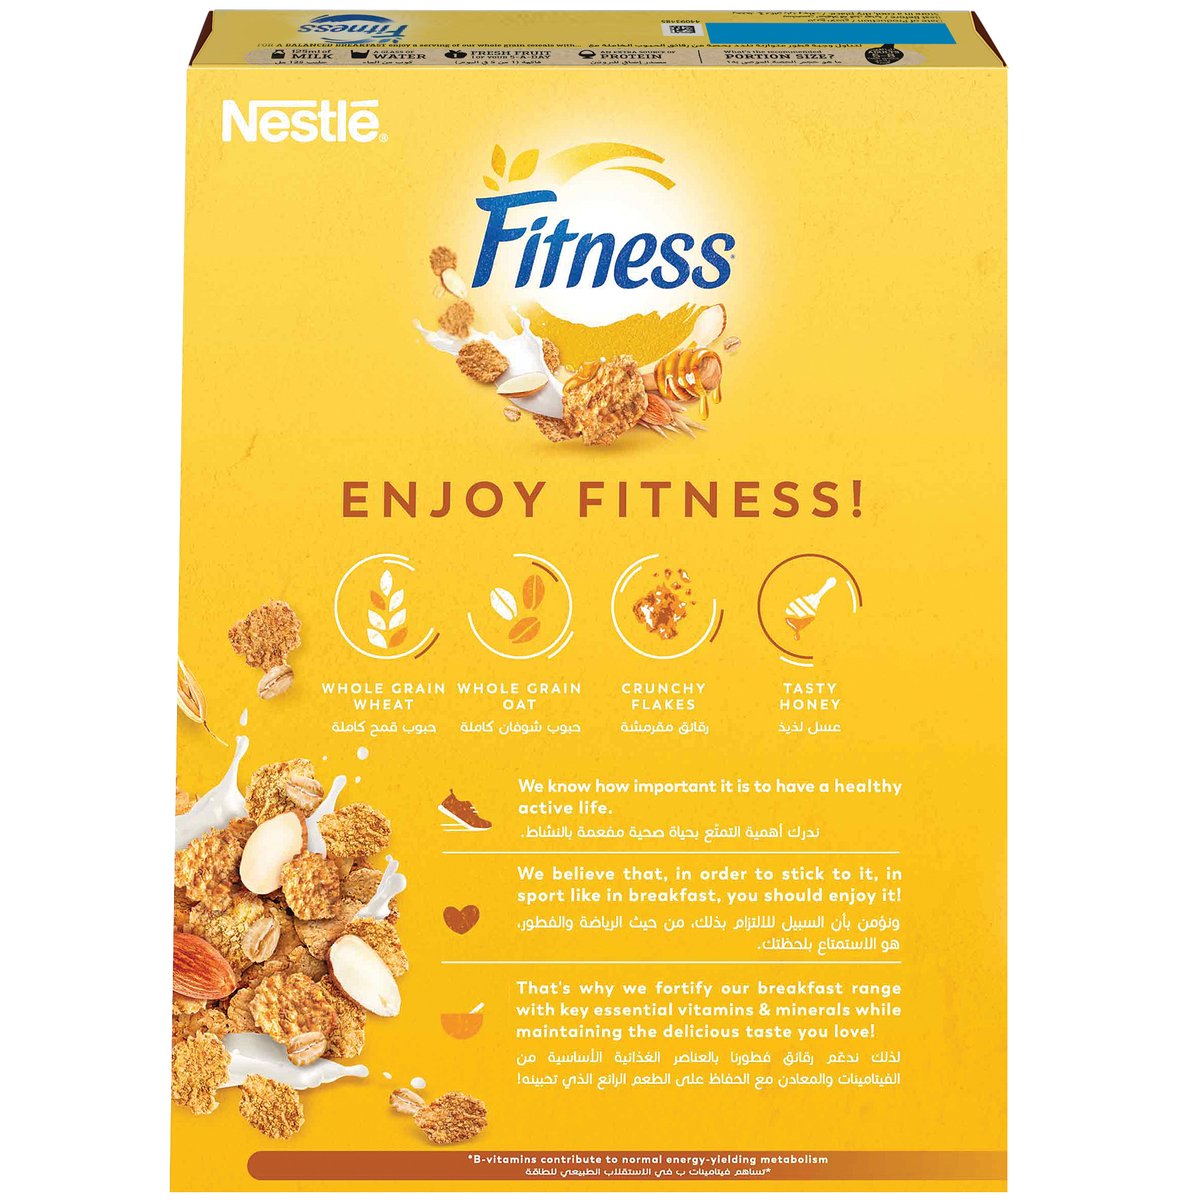 Nestle Fitness Honey And Almonds Breakfast Cereal 425 g